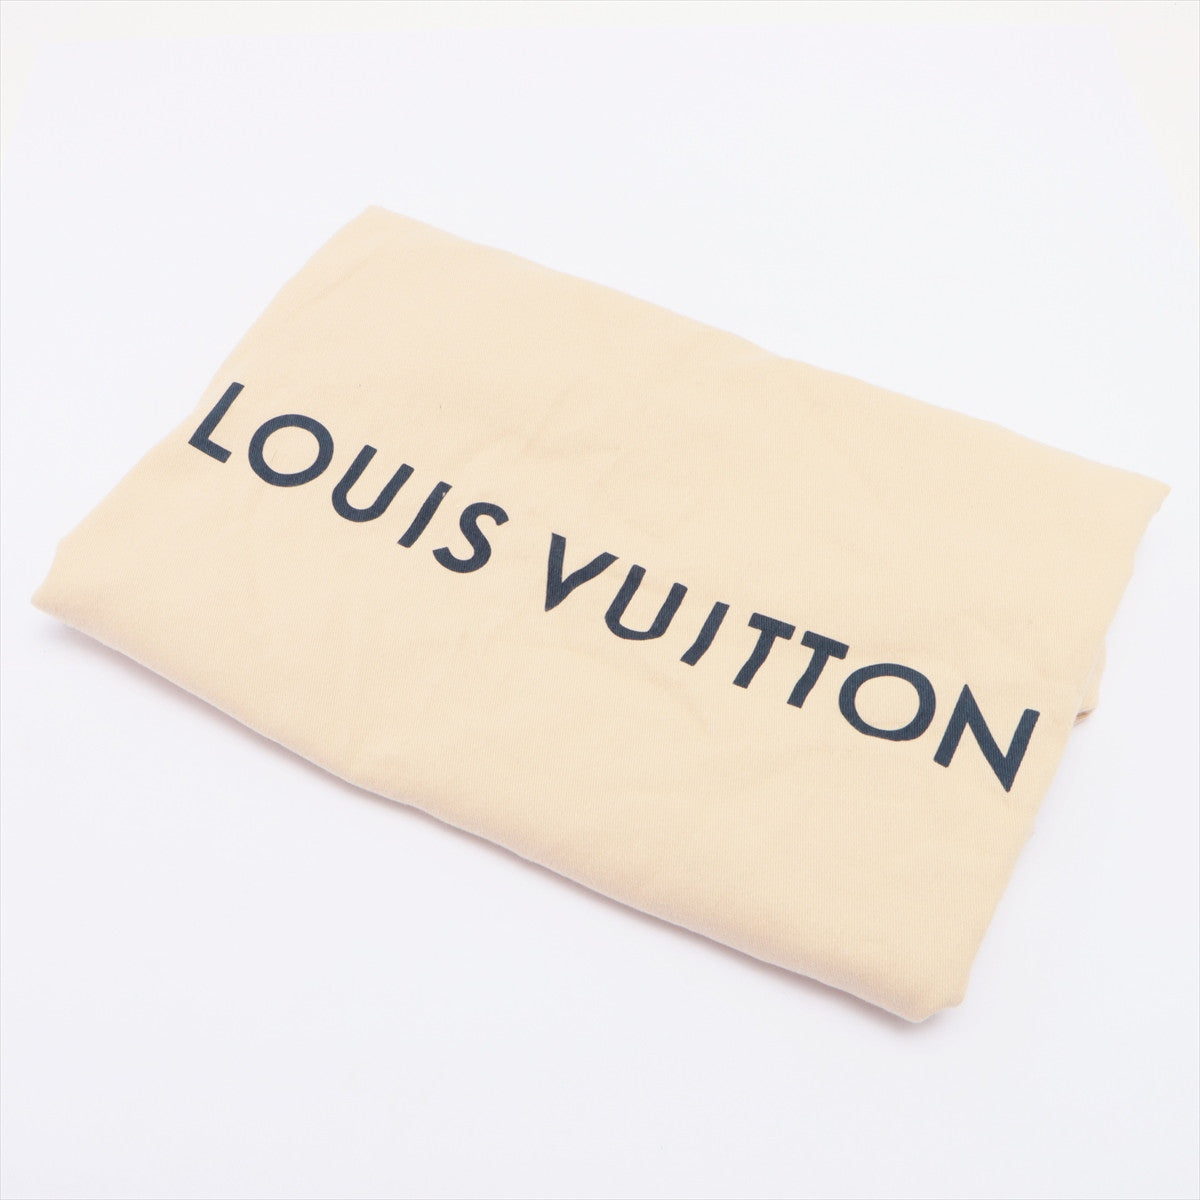 Louis Vuitton Escale Neverfull MM with Pouch